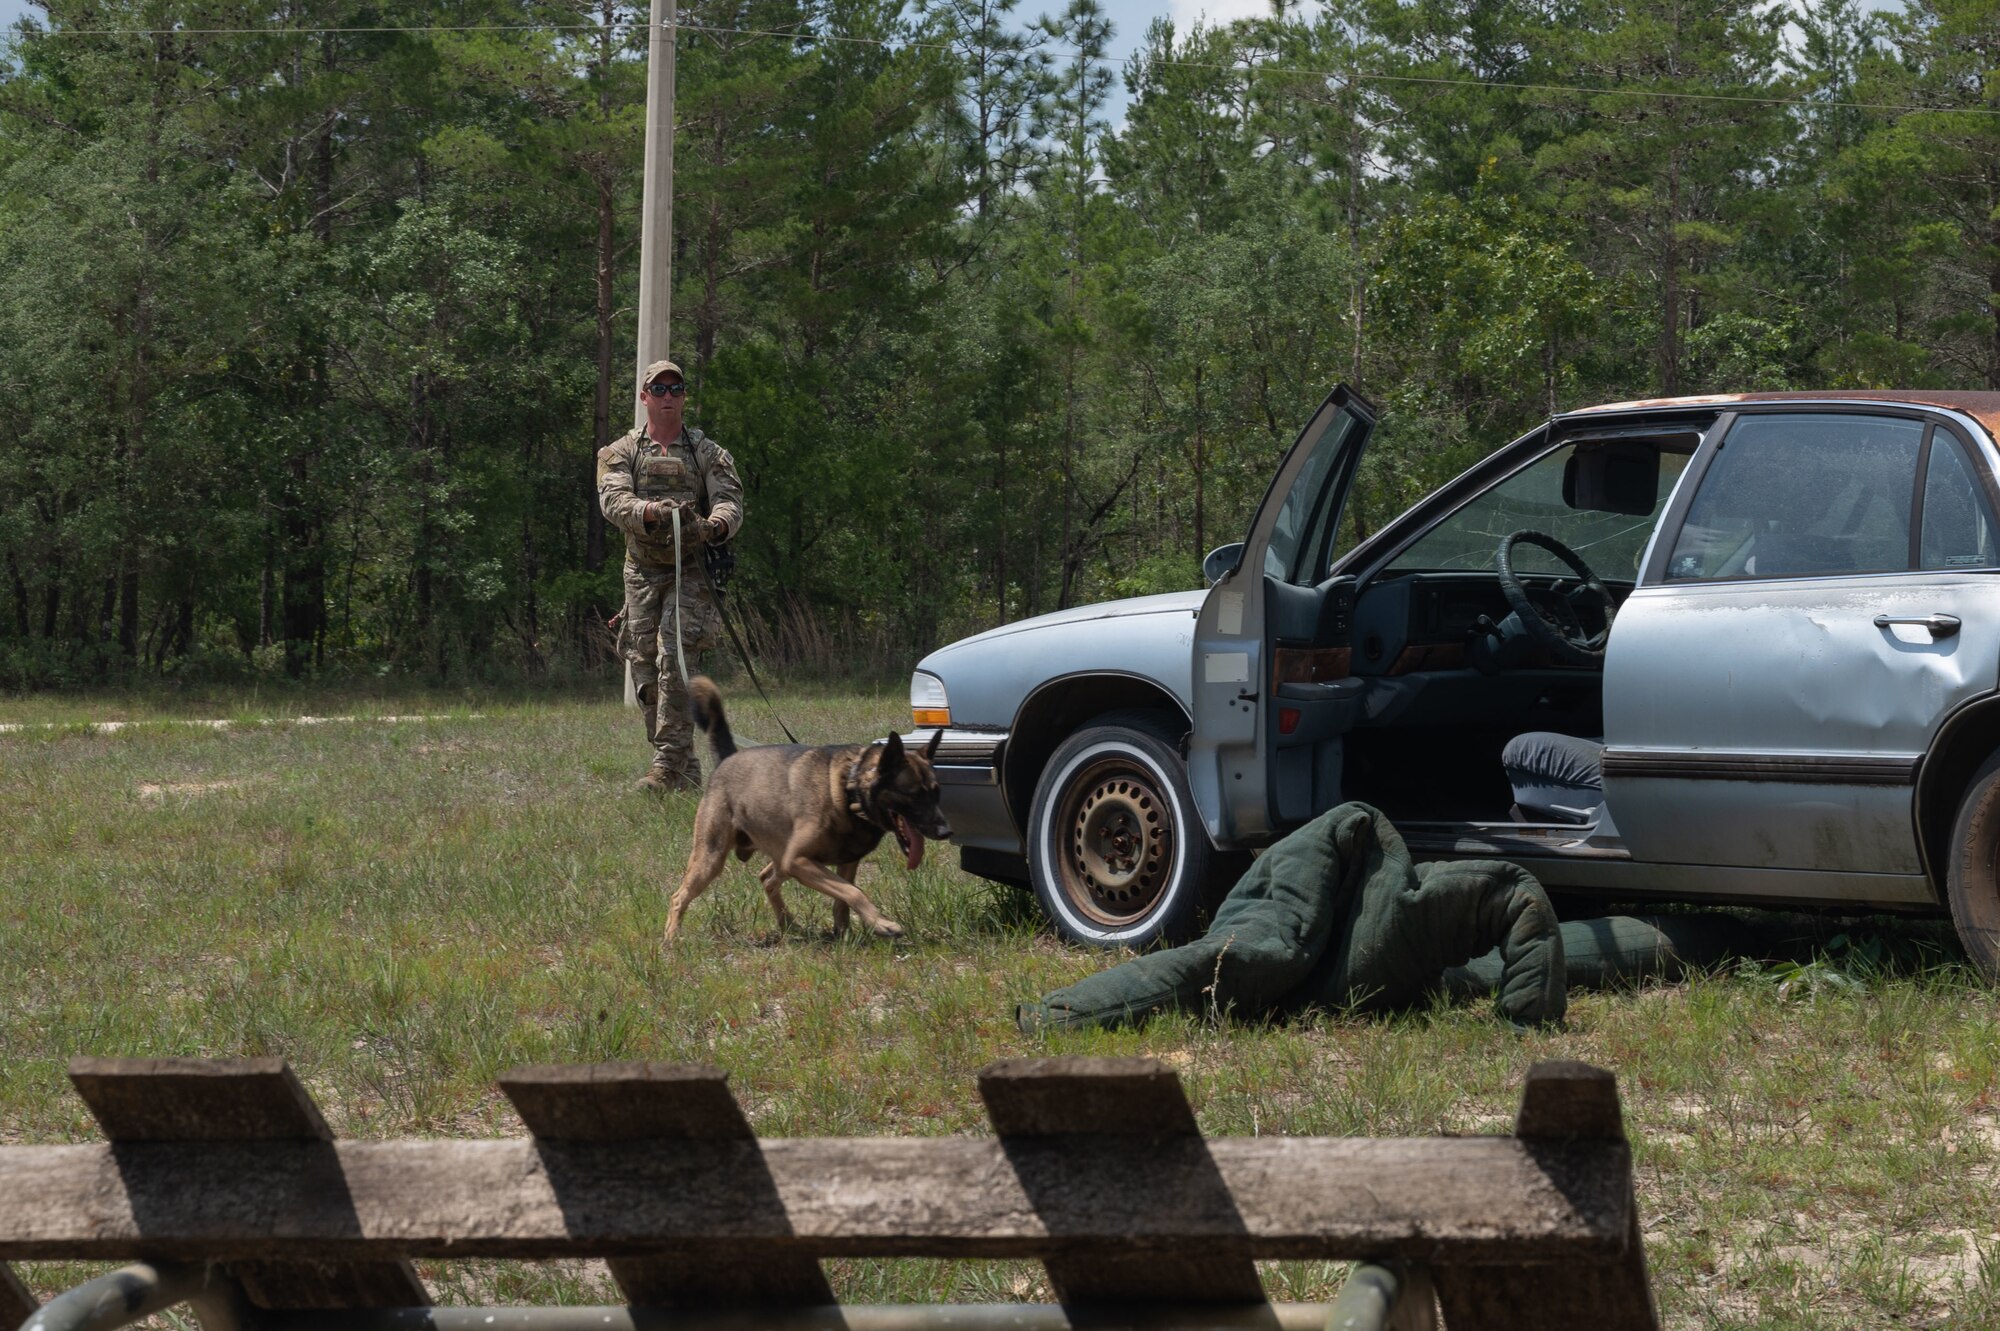 U.S. Air Force Staff Sgt. Thomas Cullen, a military working dog handler from Tyndall Air Force Base, competes in a K9 competition during National Police Week on May 18, 2022, at Eglin Air Force Base